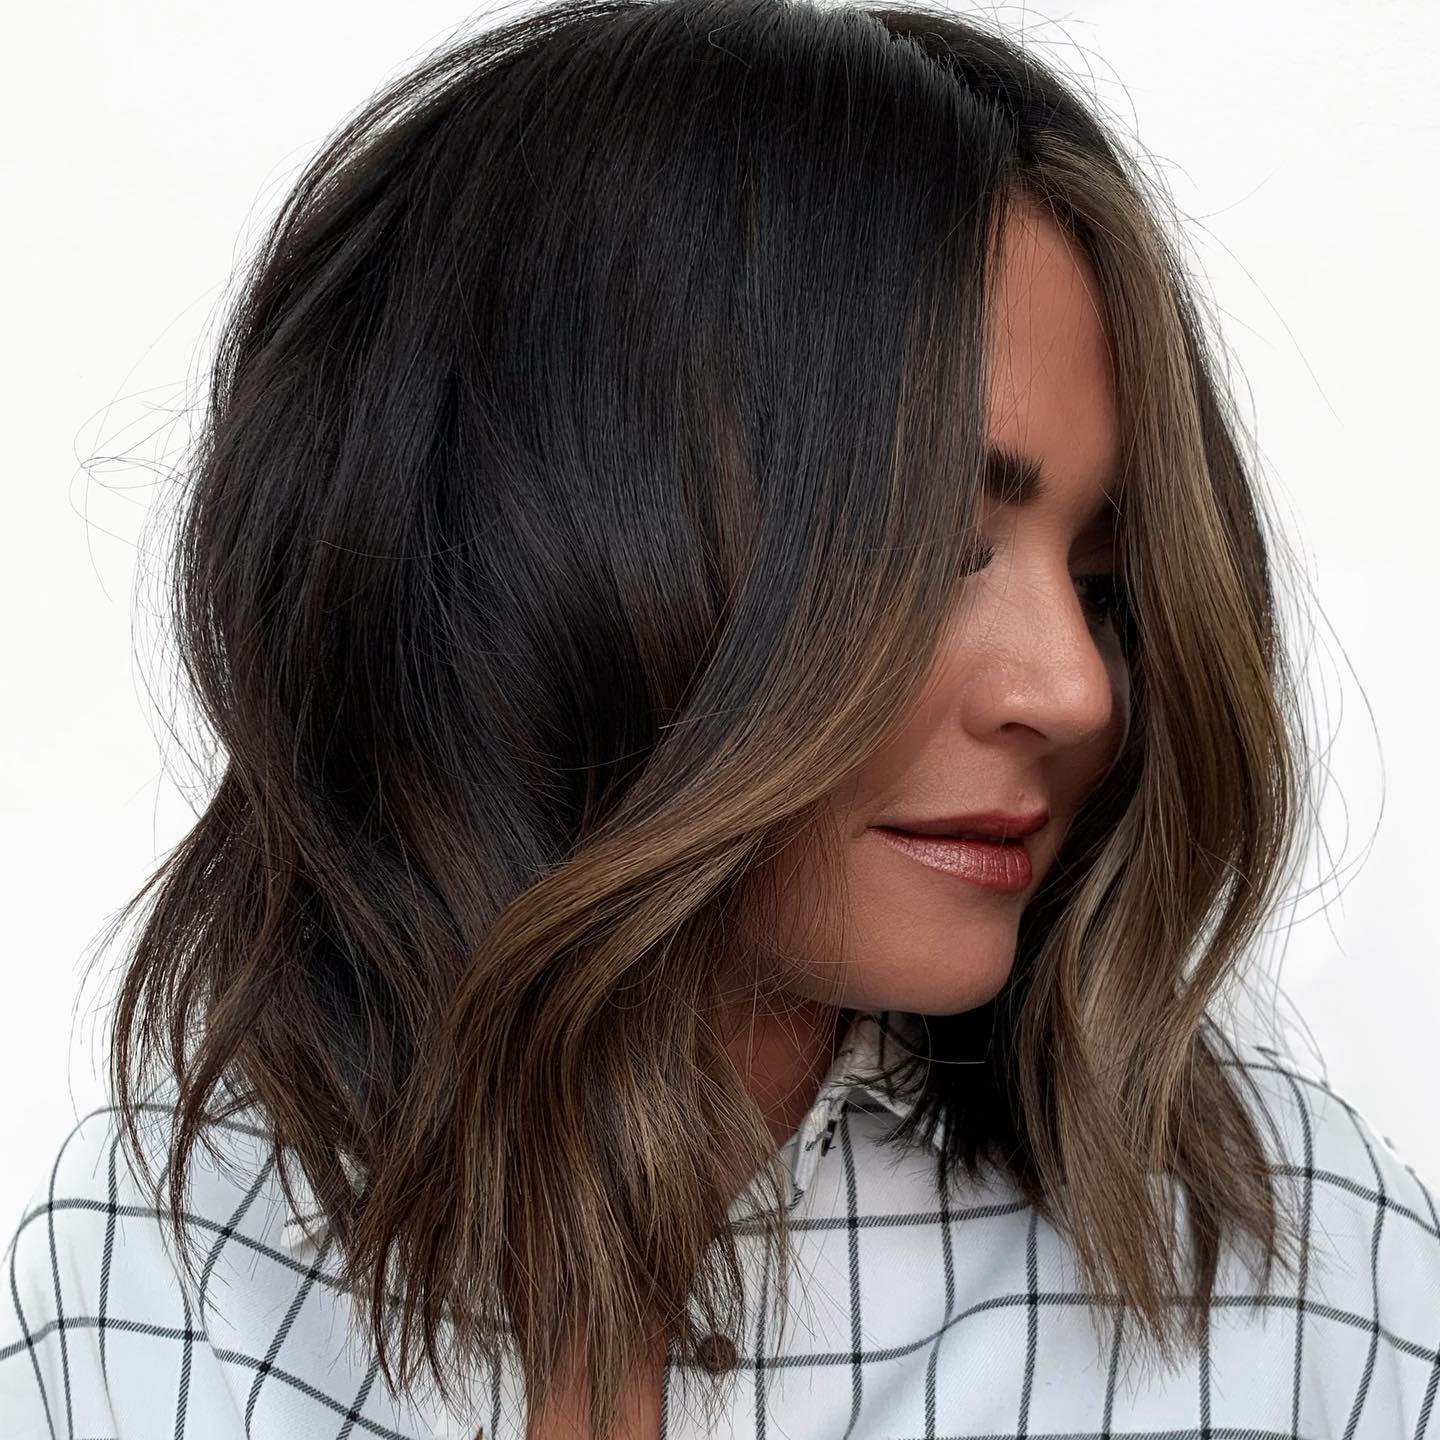 27 Trendy Medium Haircuts for Spring 2024: Discover Your New Look ...